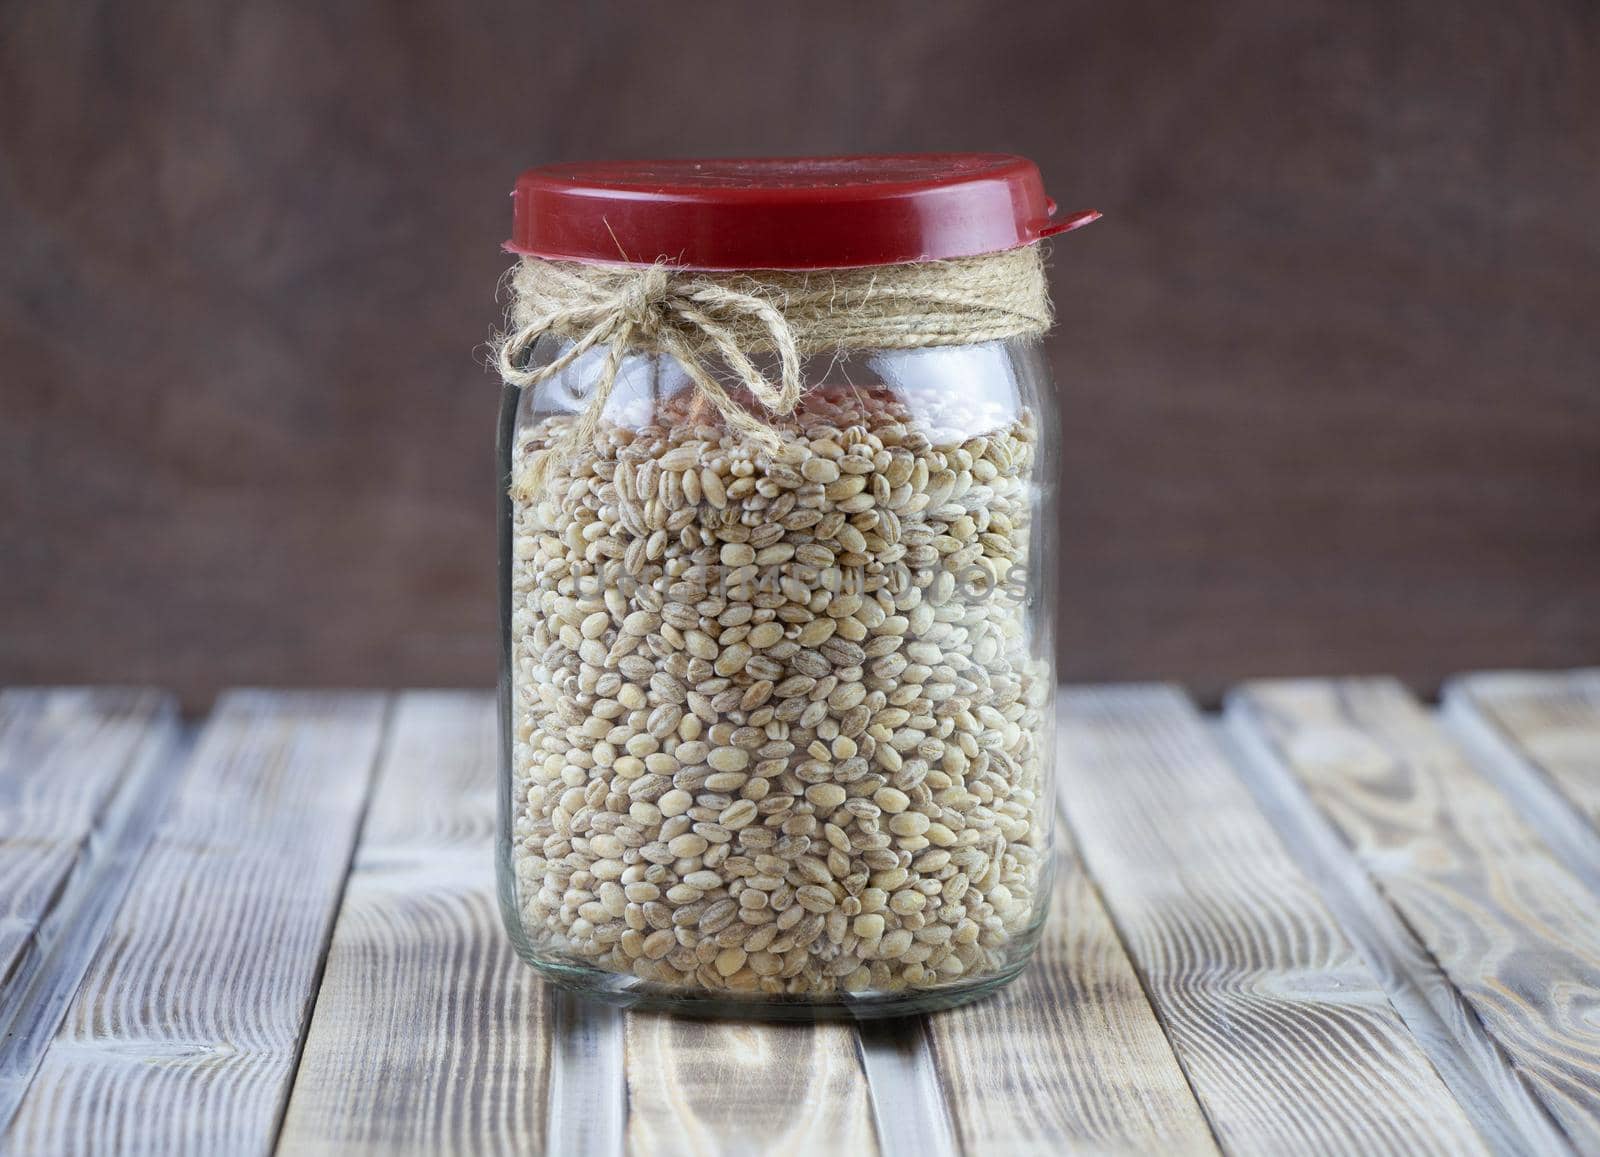 Pearl barley grain and glass jar on a wooden background.